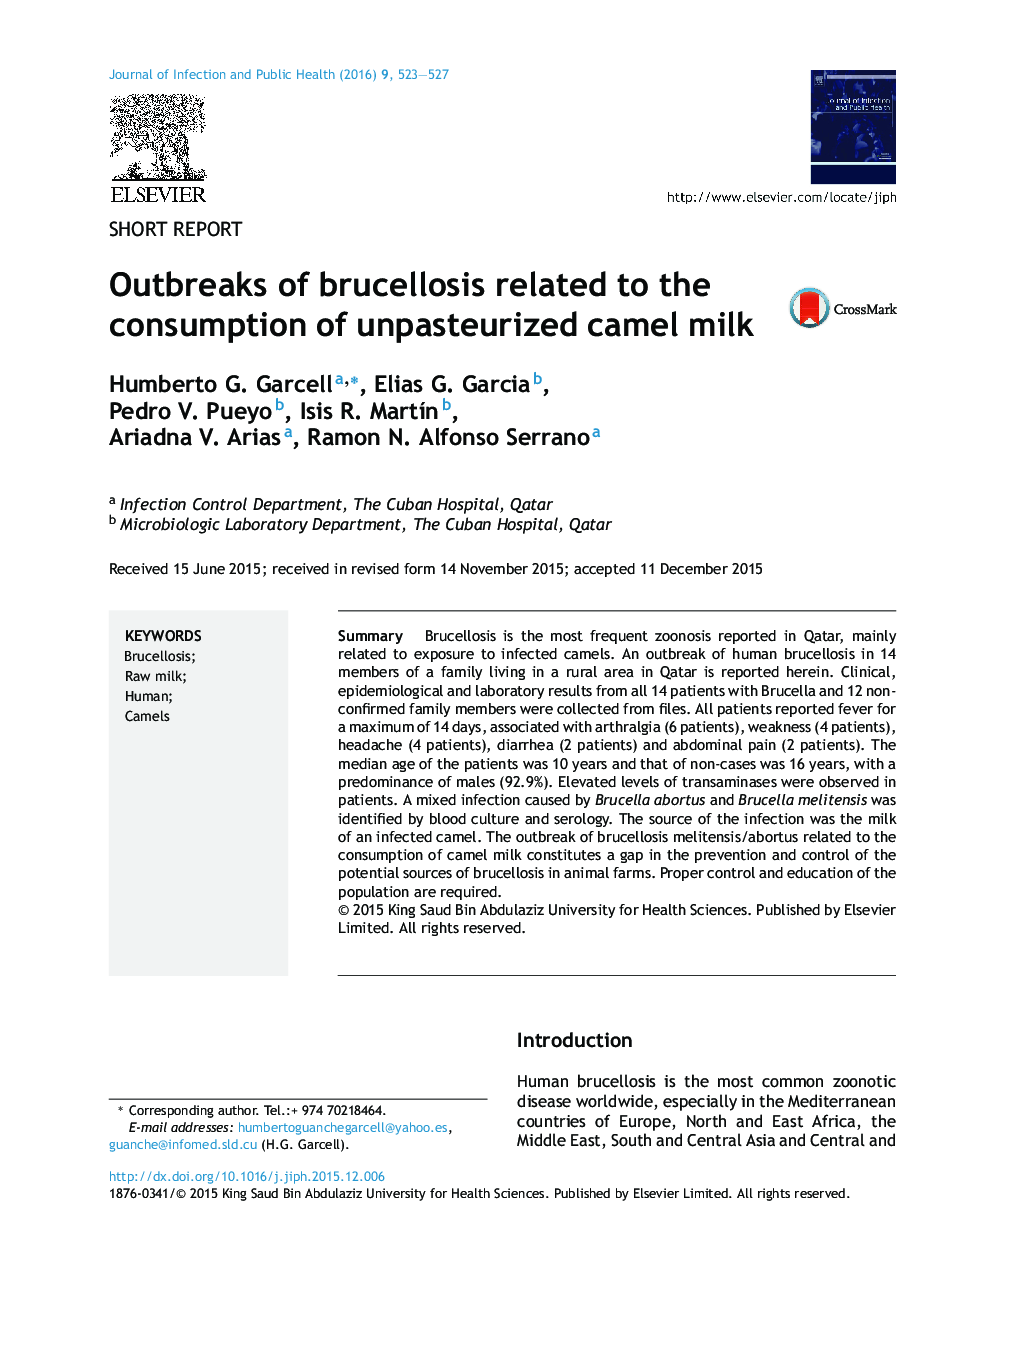 Outbreaks of brucellosis related to the consumption of unpasteurized camel milk